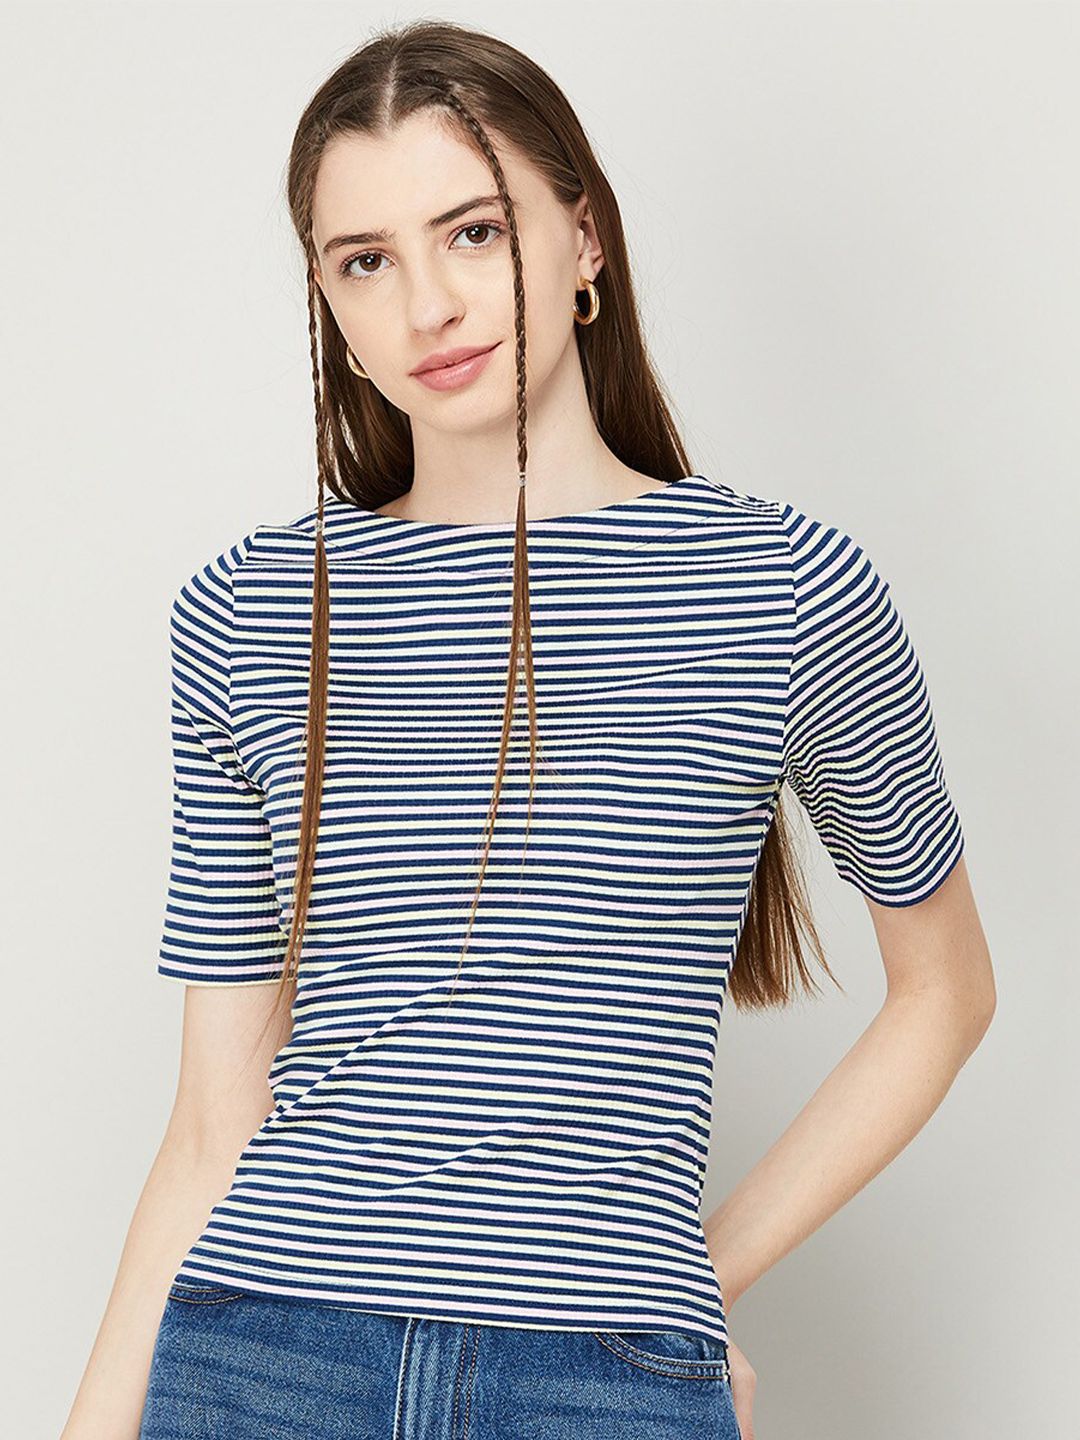 Ginger by Lifestyle Striped Regular Top Price in India